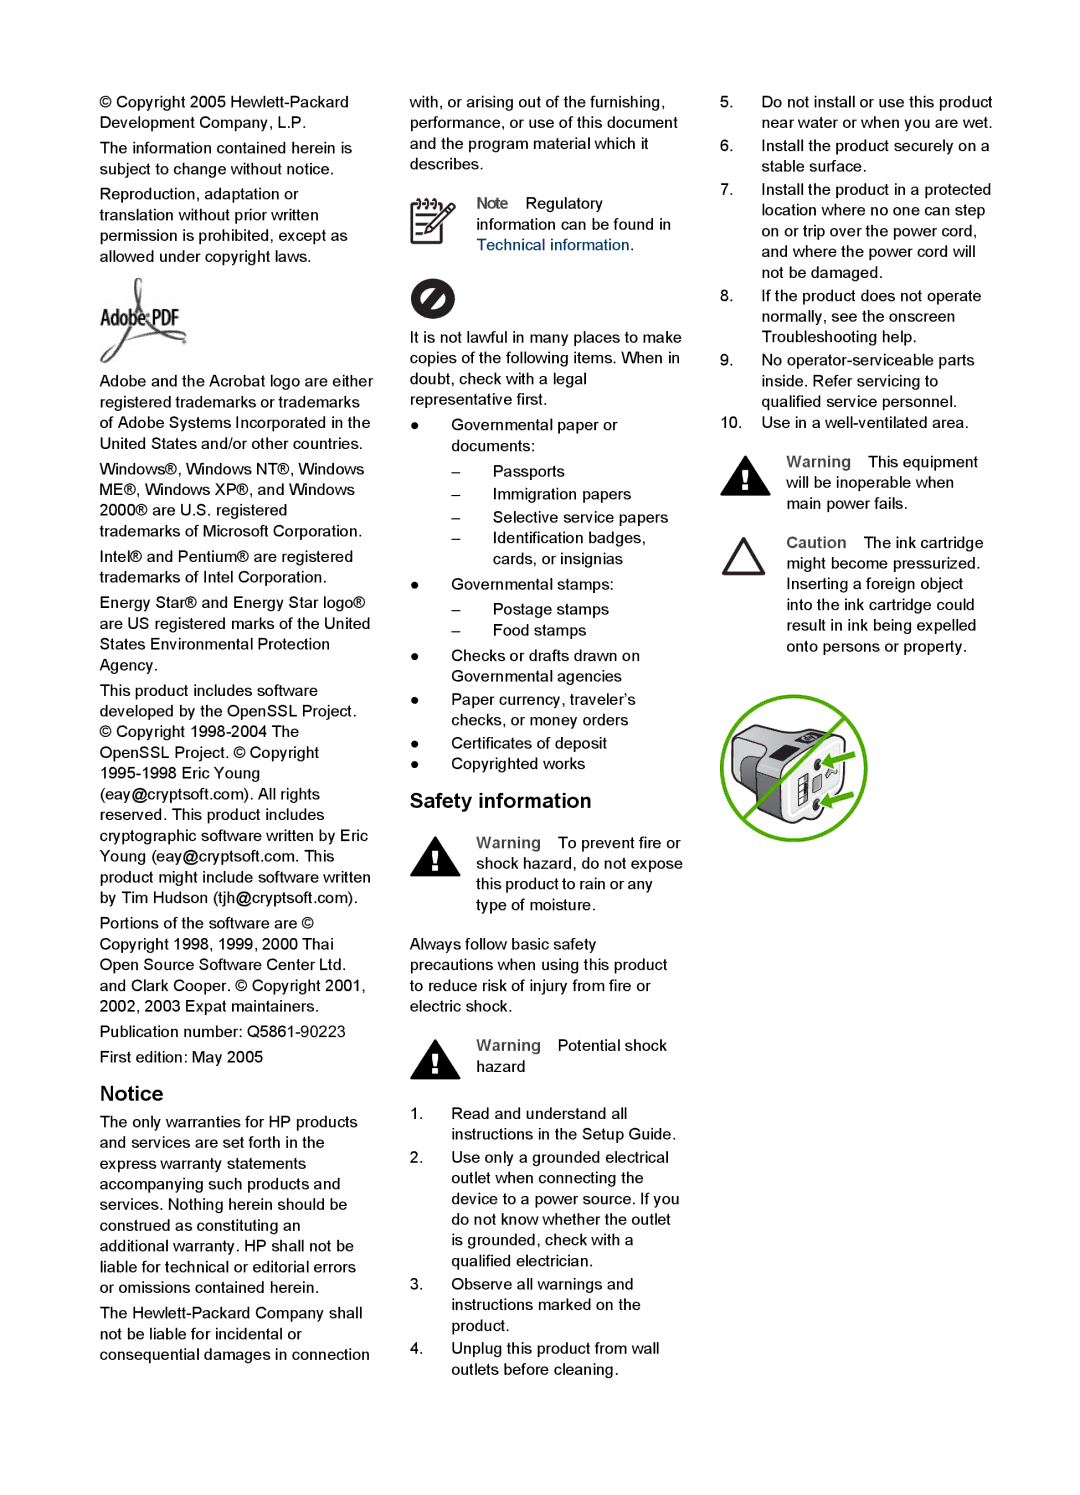 HP 3300 manual Safety information 